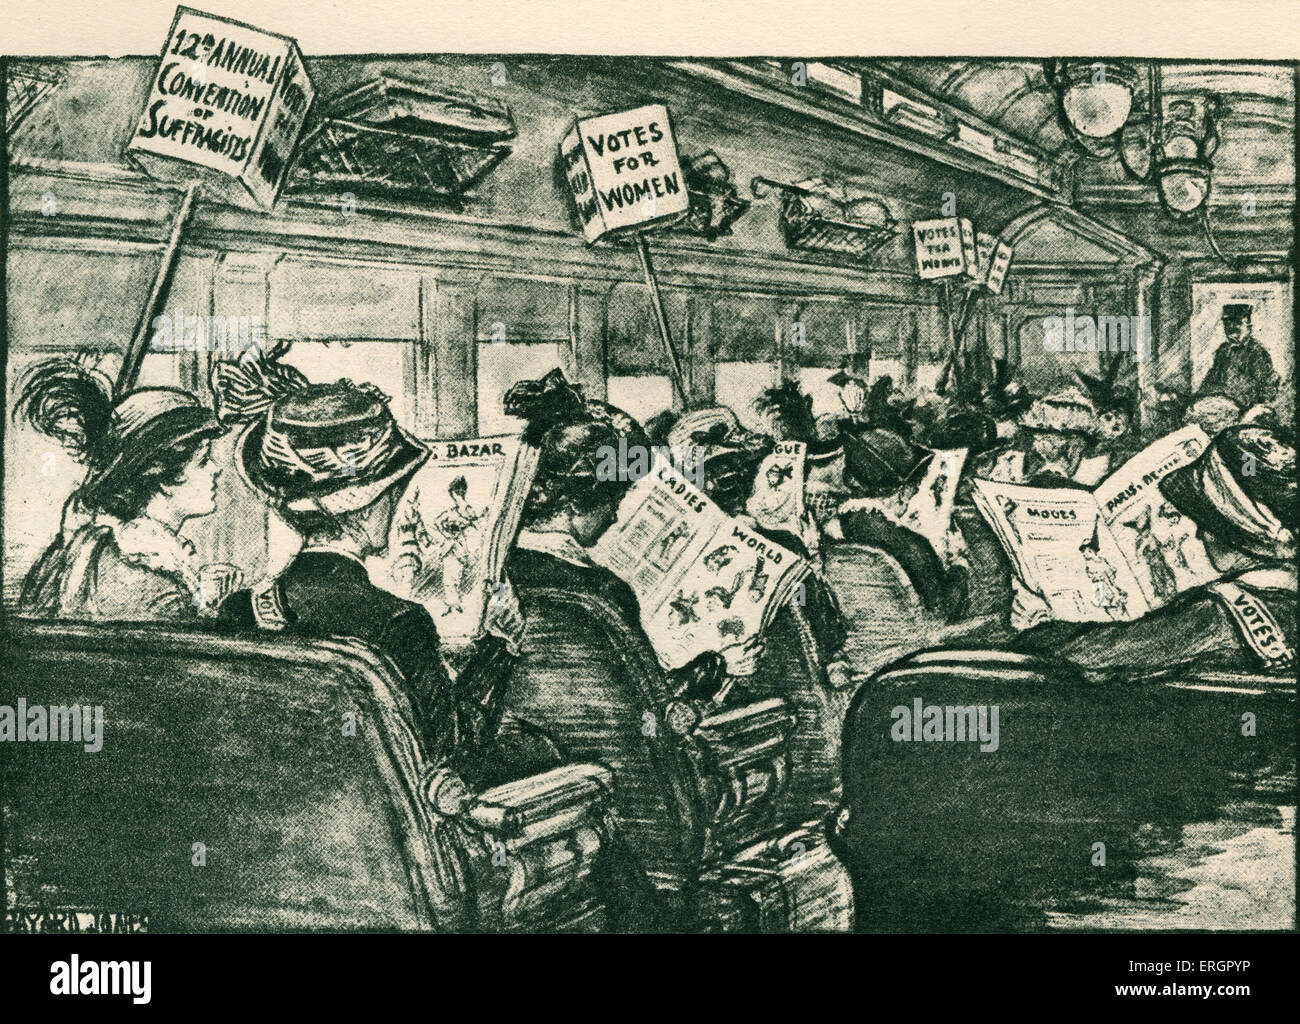 Group of suffragettes travelling on a bus to the '12th annual convention of Suffragettes'. The women carry placards stating Stock Photo